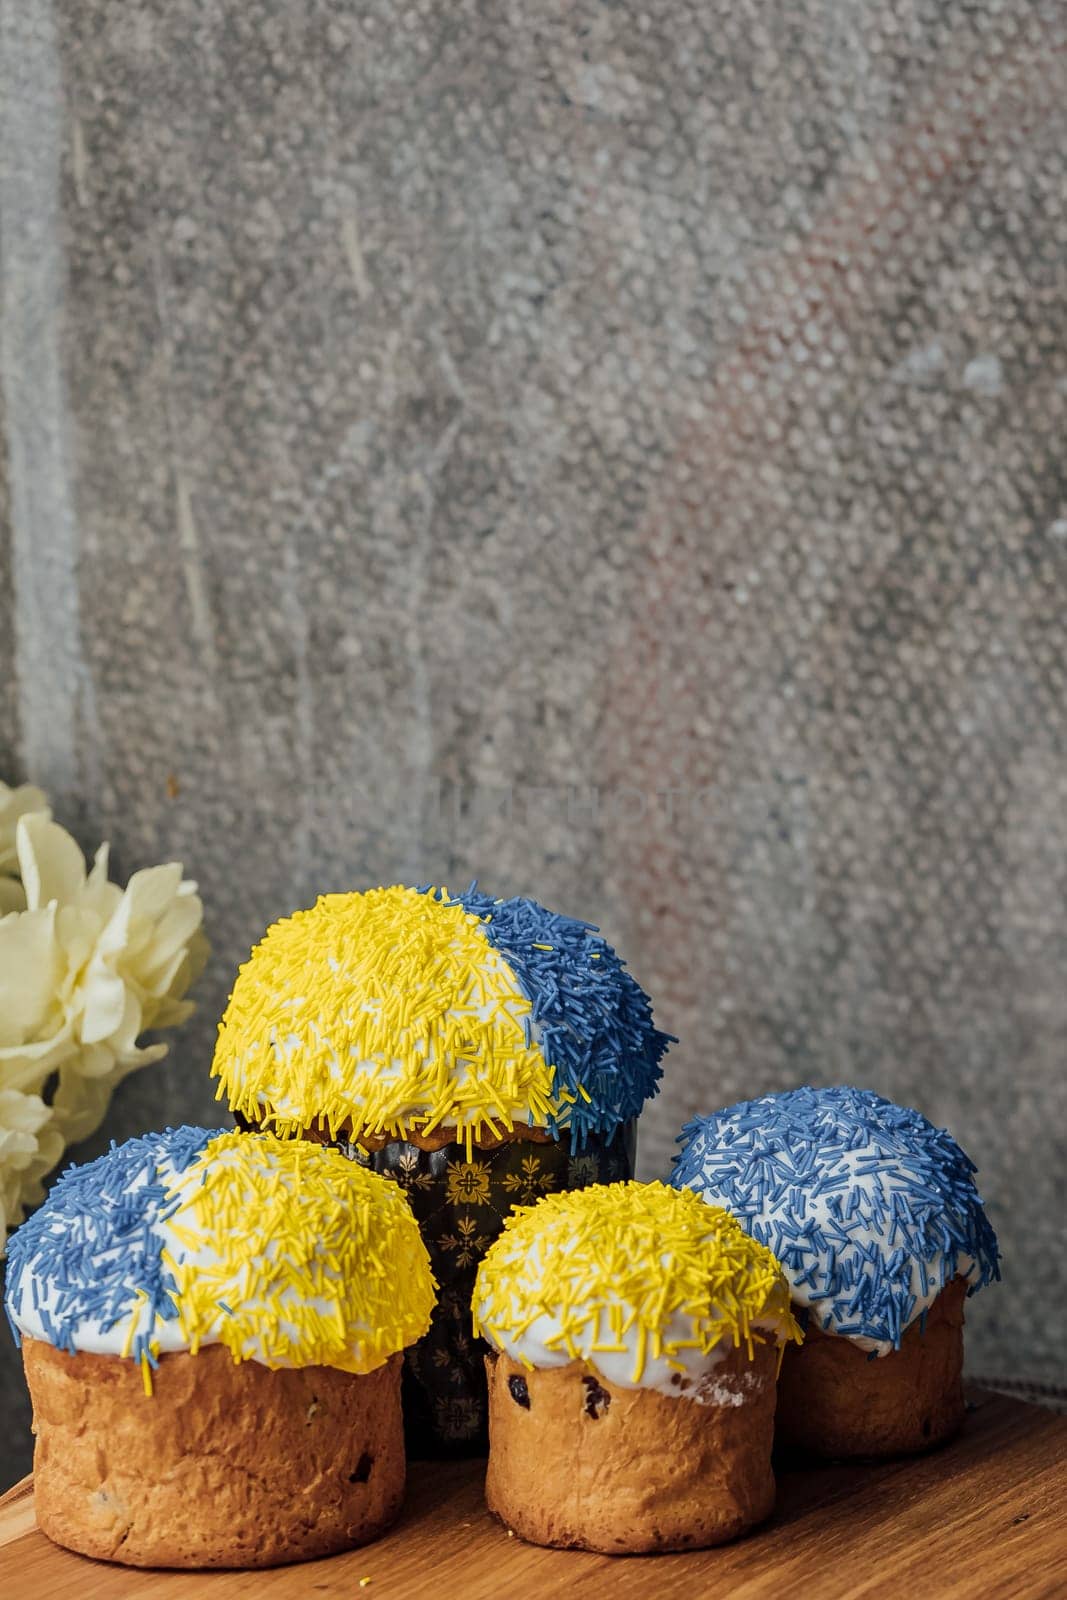 Delicious Easter cakes in the colors of the flag of Ukraine, yellow and blue on a wooden table with flowers in the background. place for text. selective focus by Anyatachka